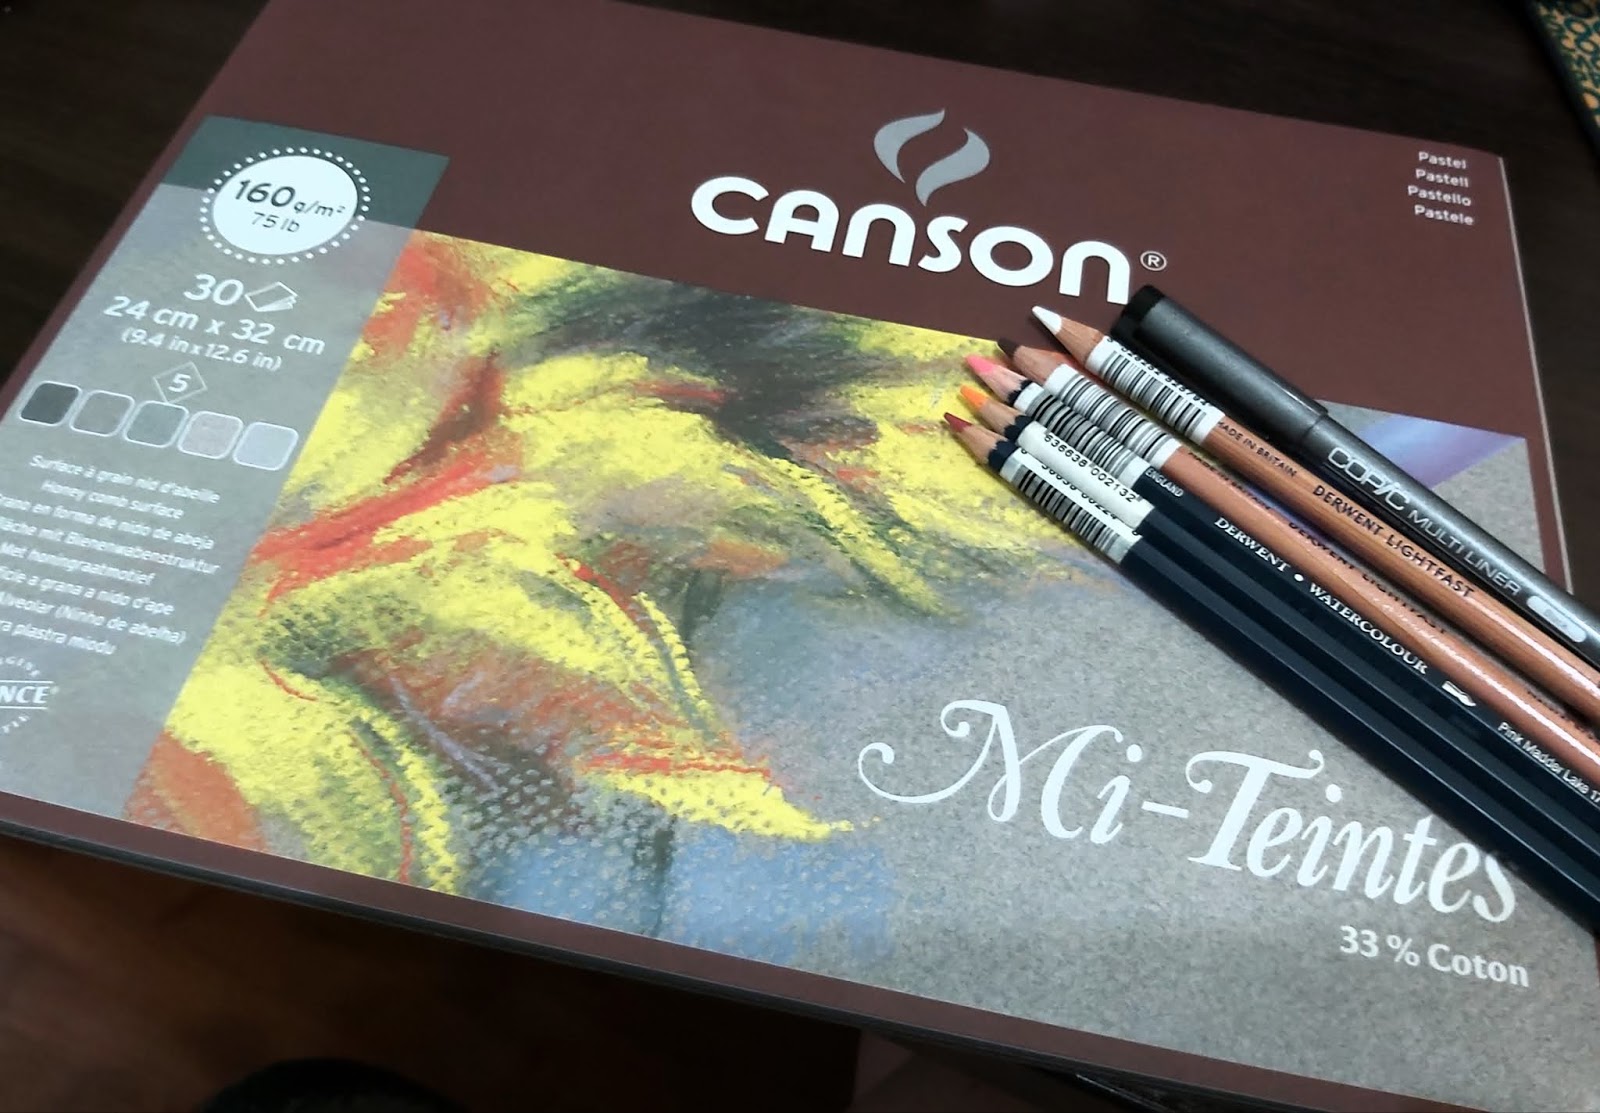 Stabilo CarbOthello vs Faber-Castell Pitt Pastel Pencils (and more!)